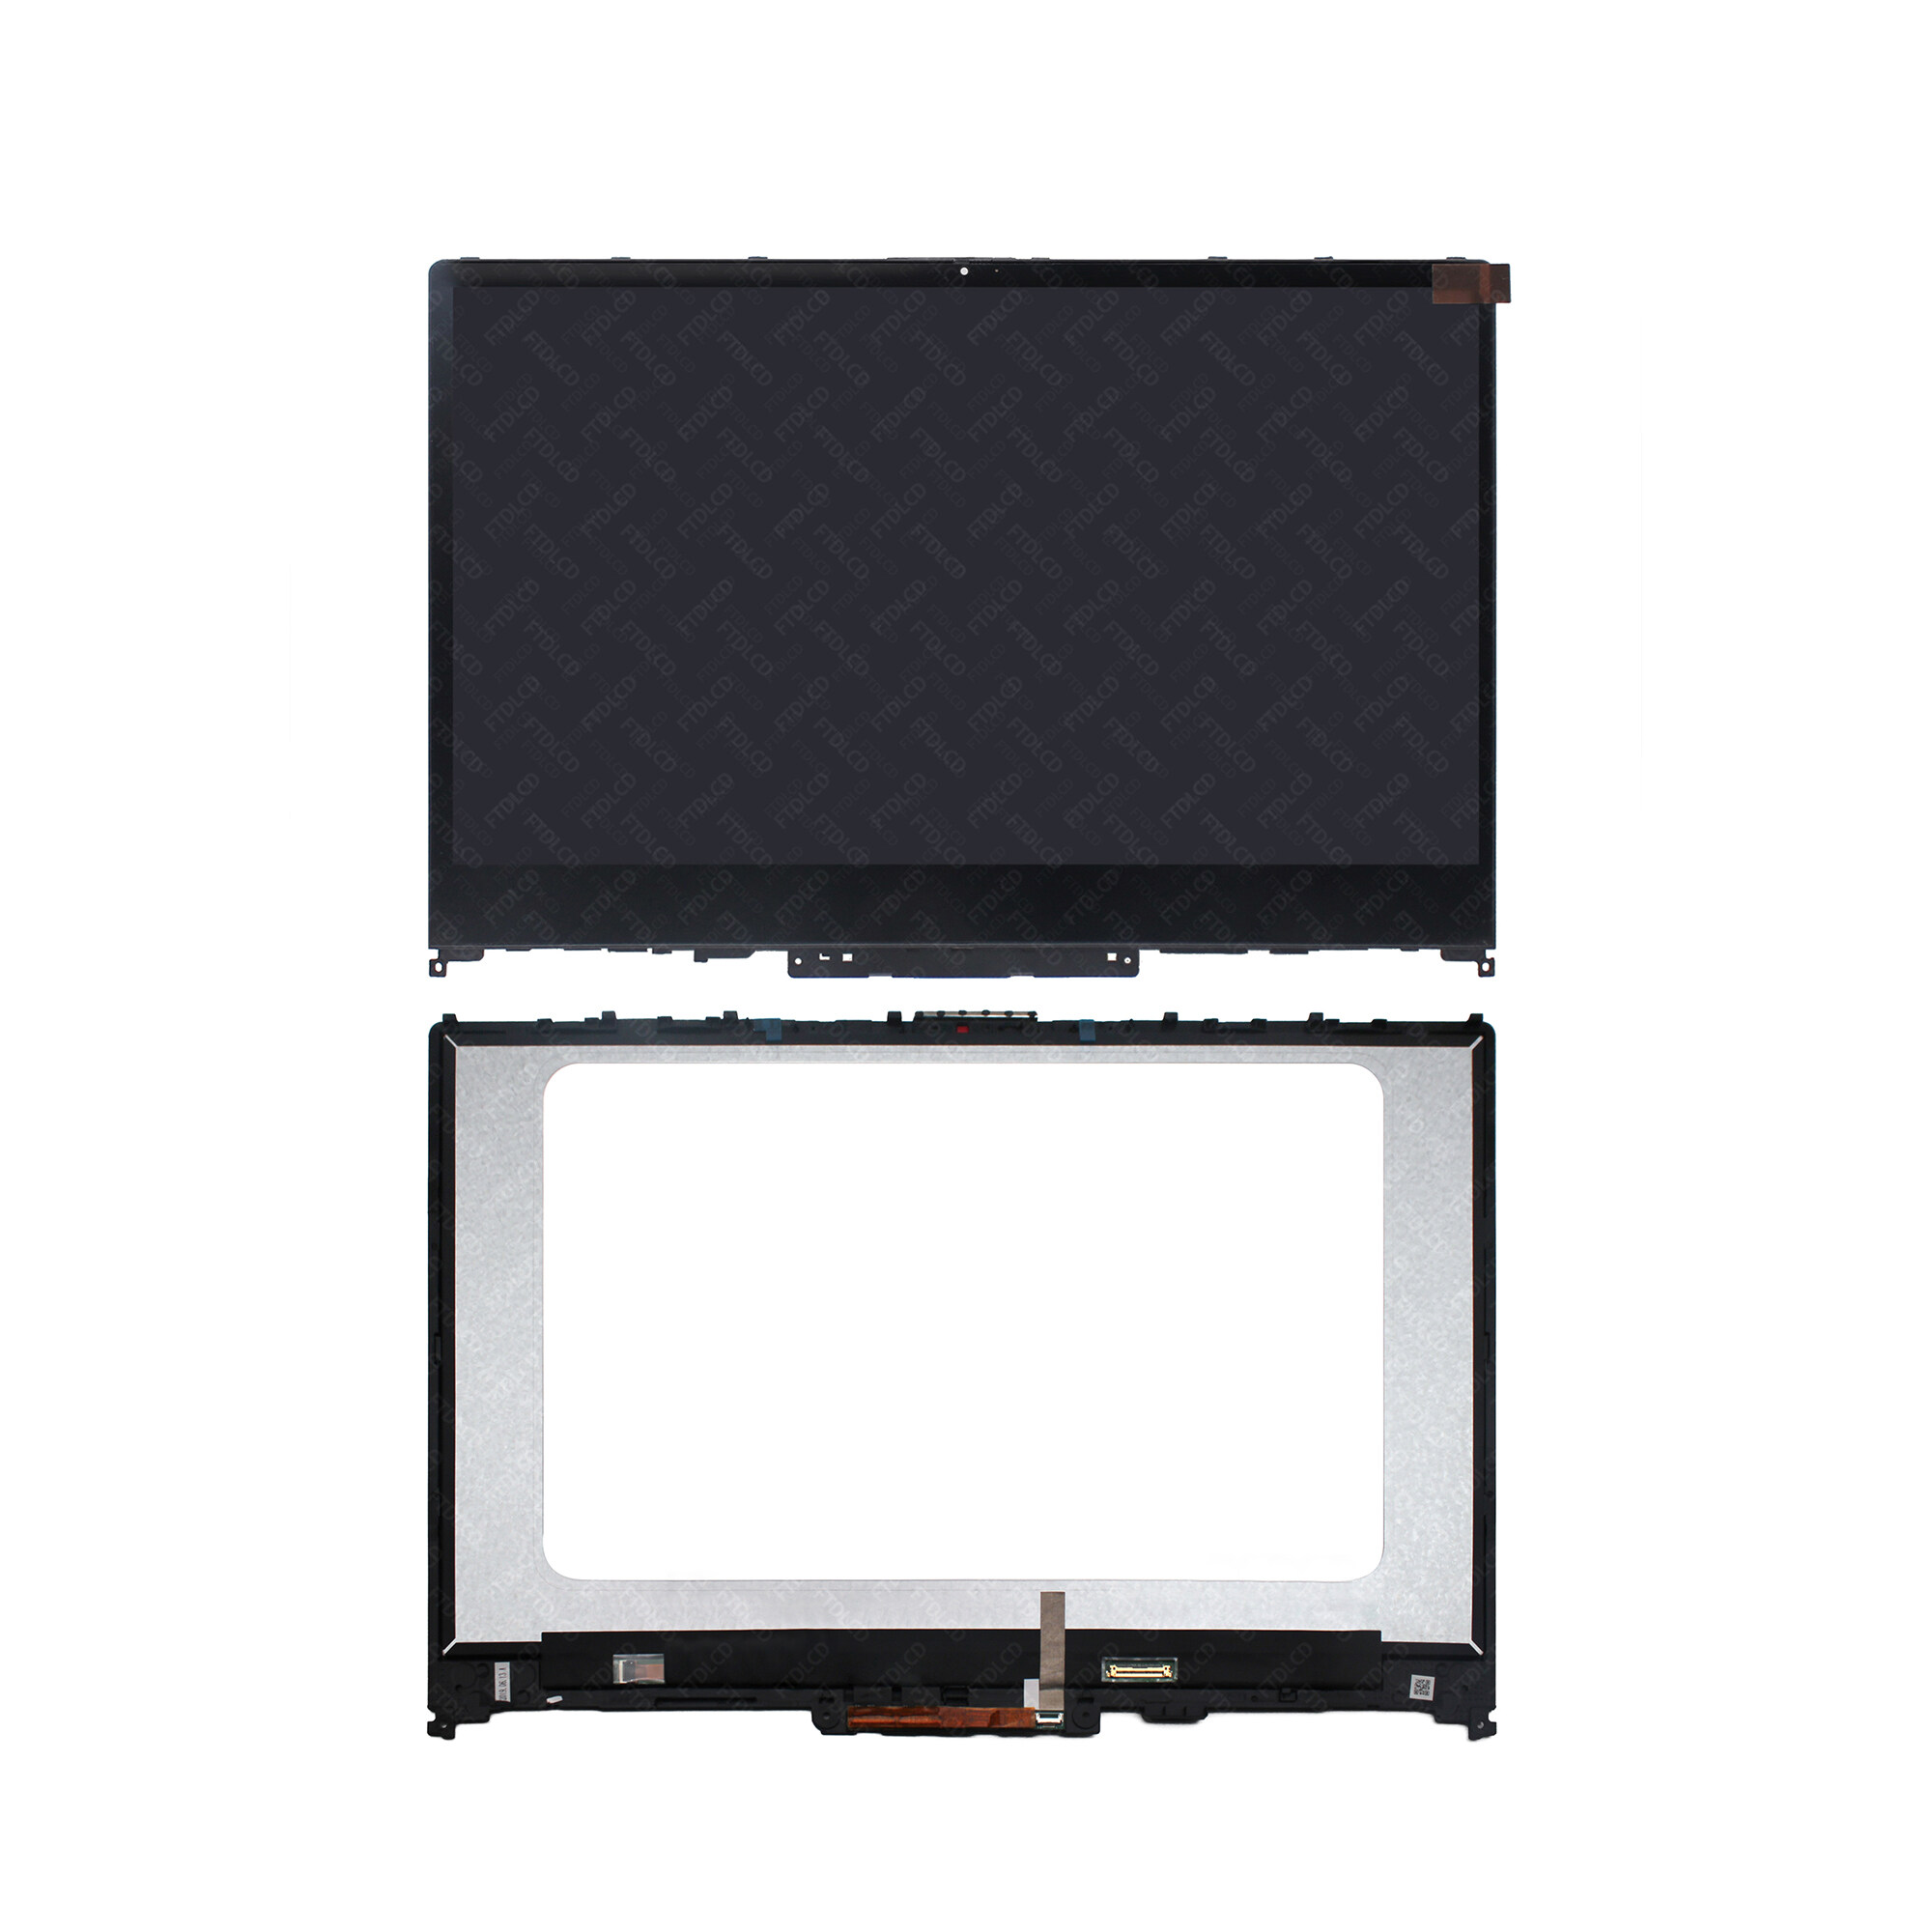 Kreplacement Replacement 15.6 inches FHD IPS LCD Panel Touch Screen Digitizer Assembly Bezel with Touch Control Board for Lenovo Ideapad C340-15IWL C340-15IML C340-15IIL 81N5 81TL 81XJ (Not for Chromebook)